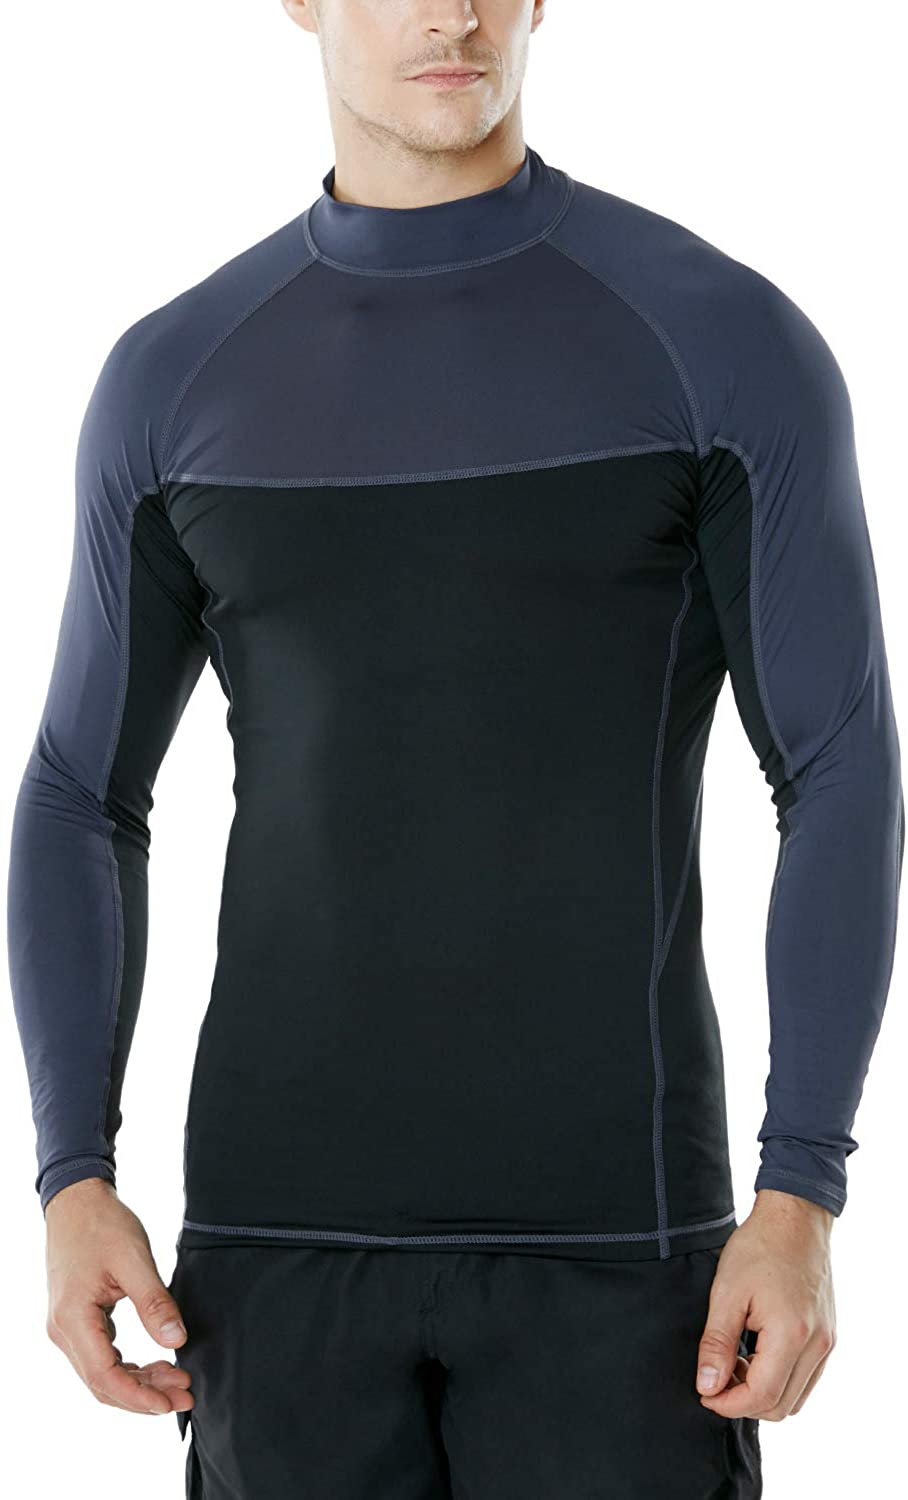 Athletic Workout Shirt Quick Dry Short Sleeve Compression Shirts Water Sports Rash Guard TSLA 1 or 3 Pack Men's UPF 50 